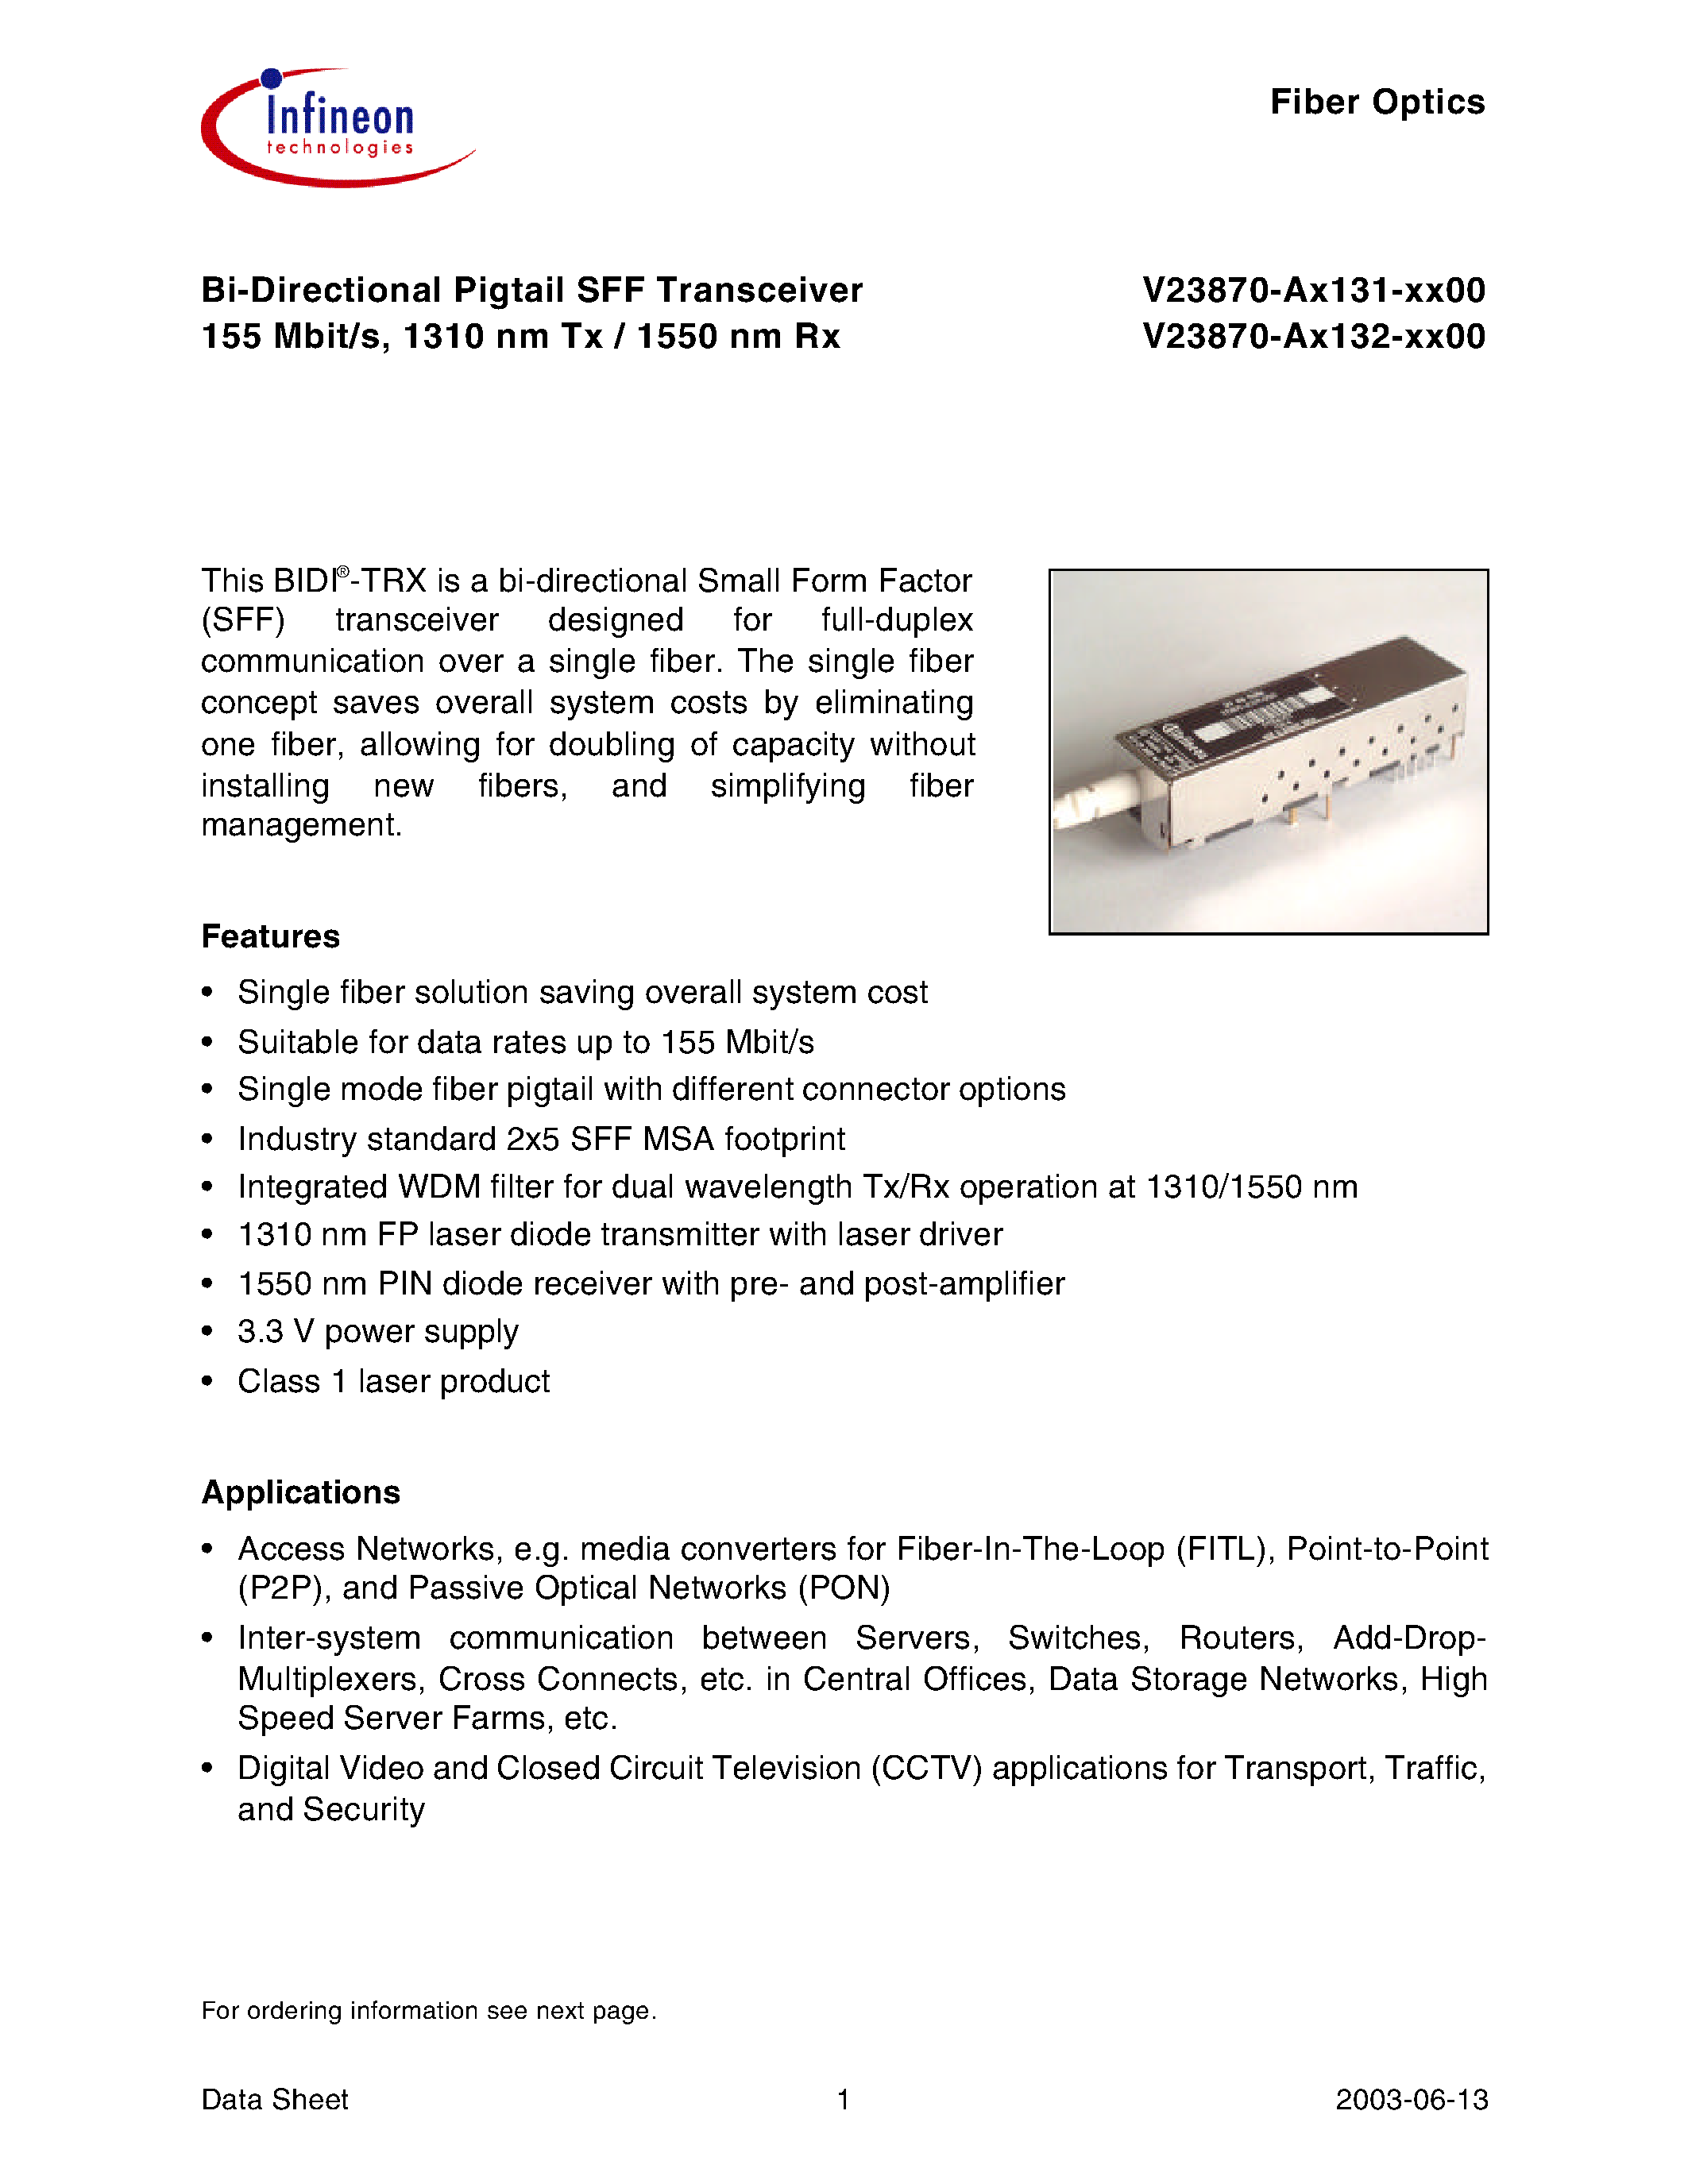 Datasheet V23870-A1131-C500 - Bi-Directional Pigtail SFF Transceiver 155 Mbit/s/ 1310 nm Tx / 1550 nm Rx page 1